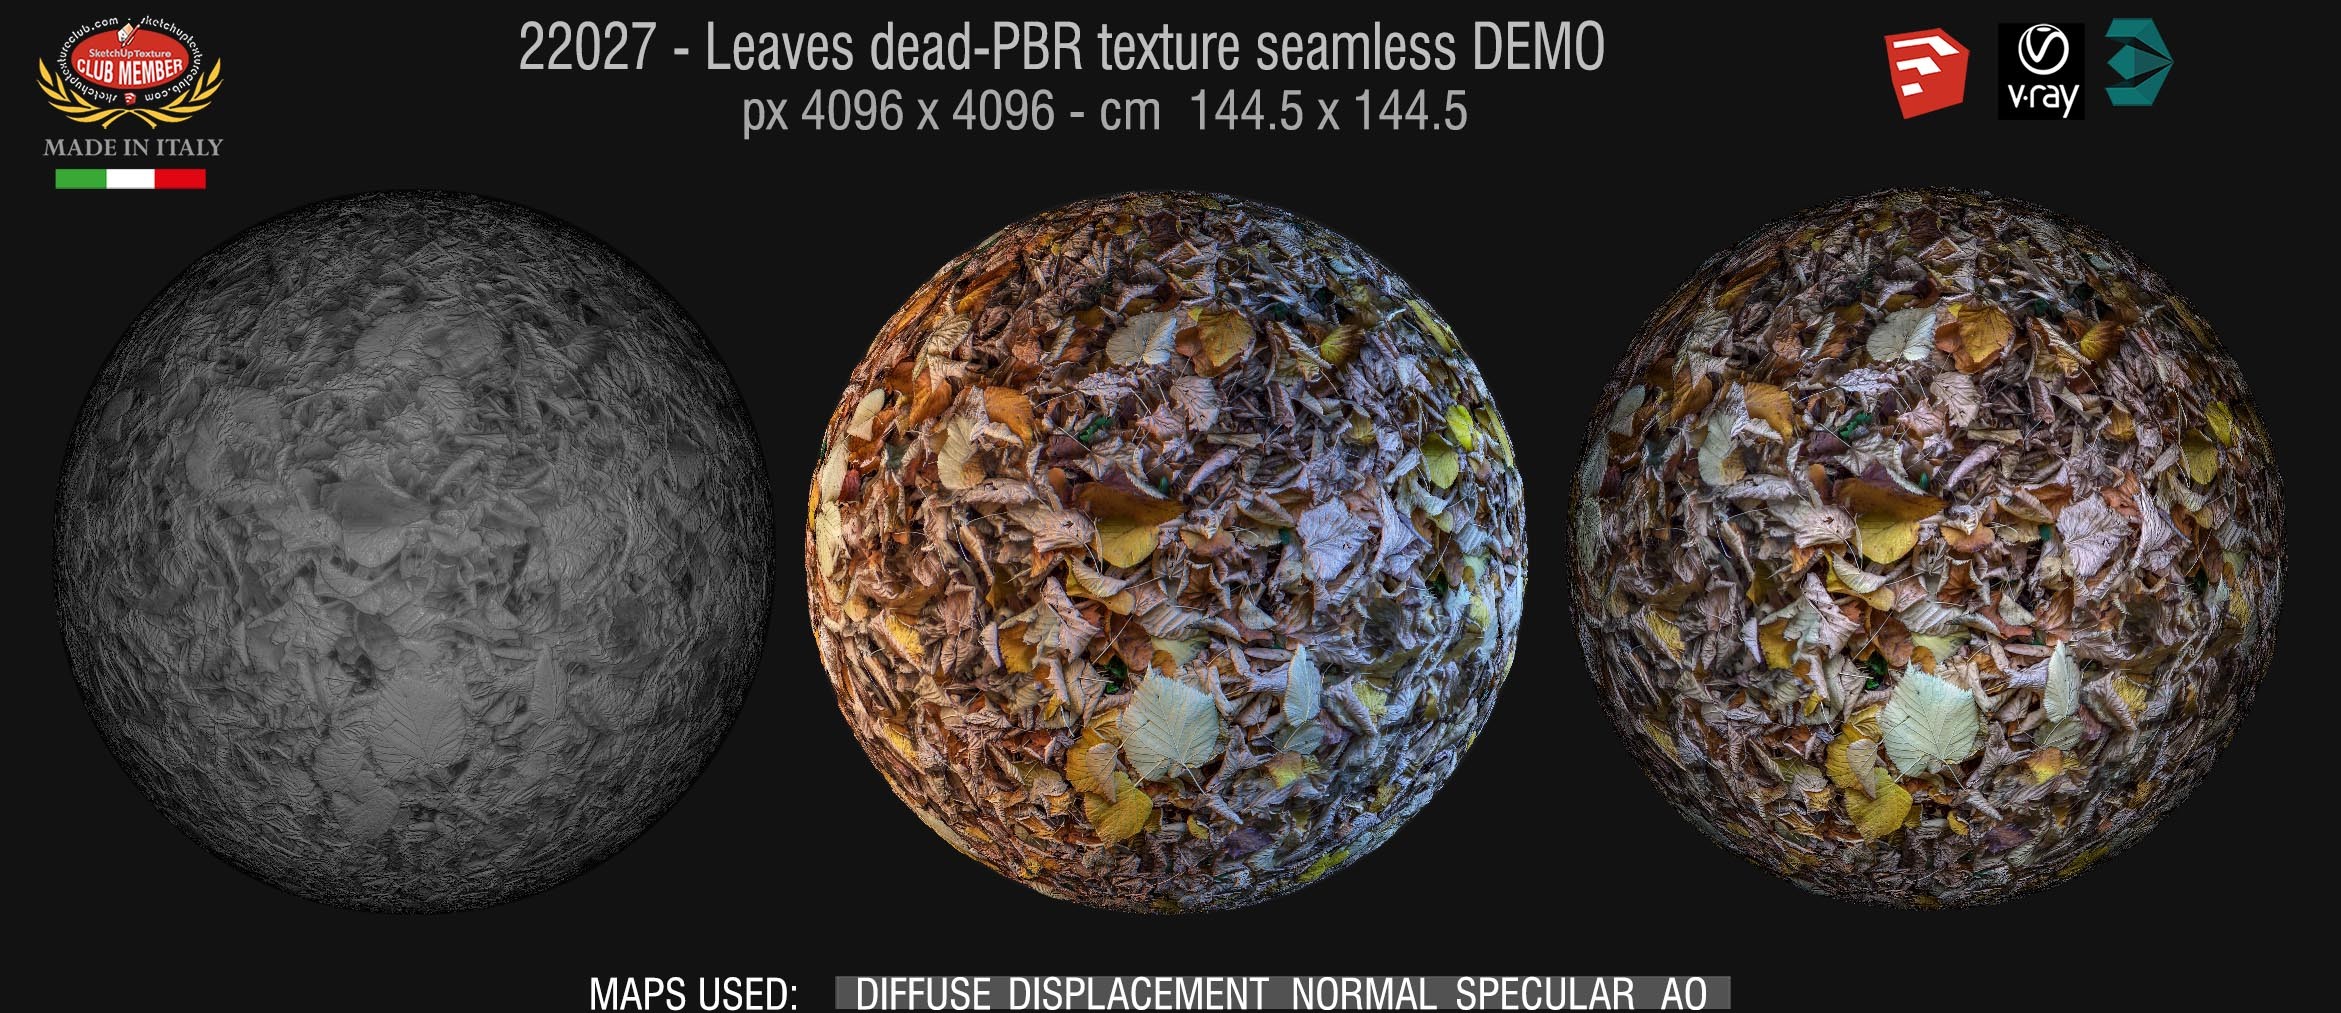 22027 leaves dead PBR texture seamless DEMO